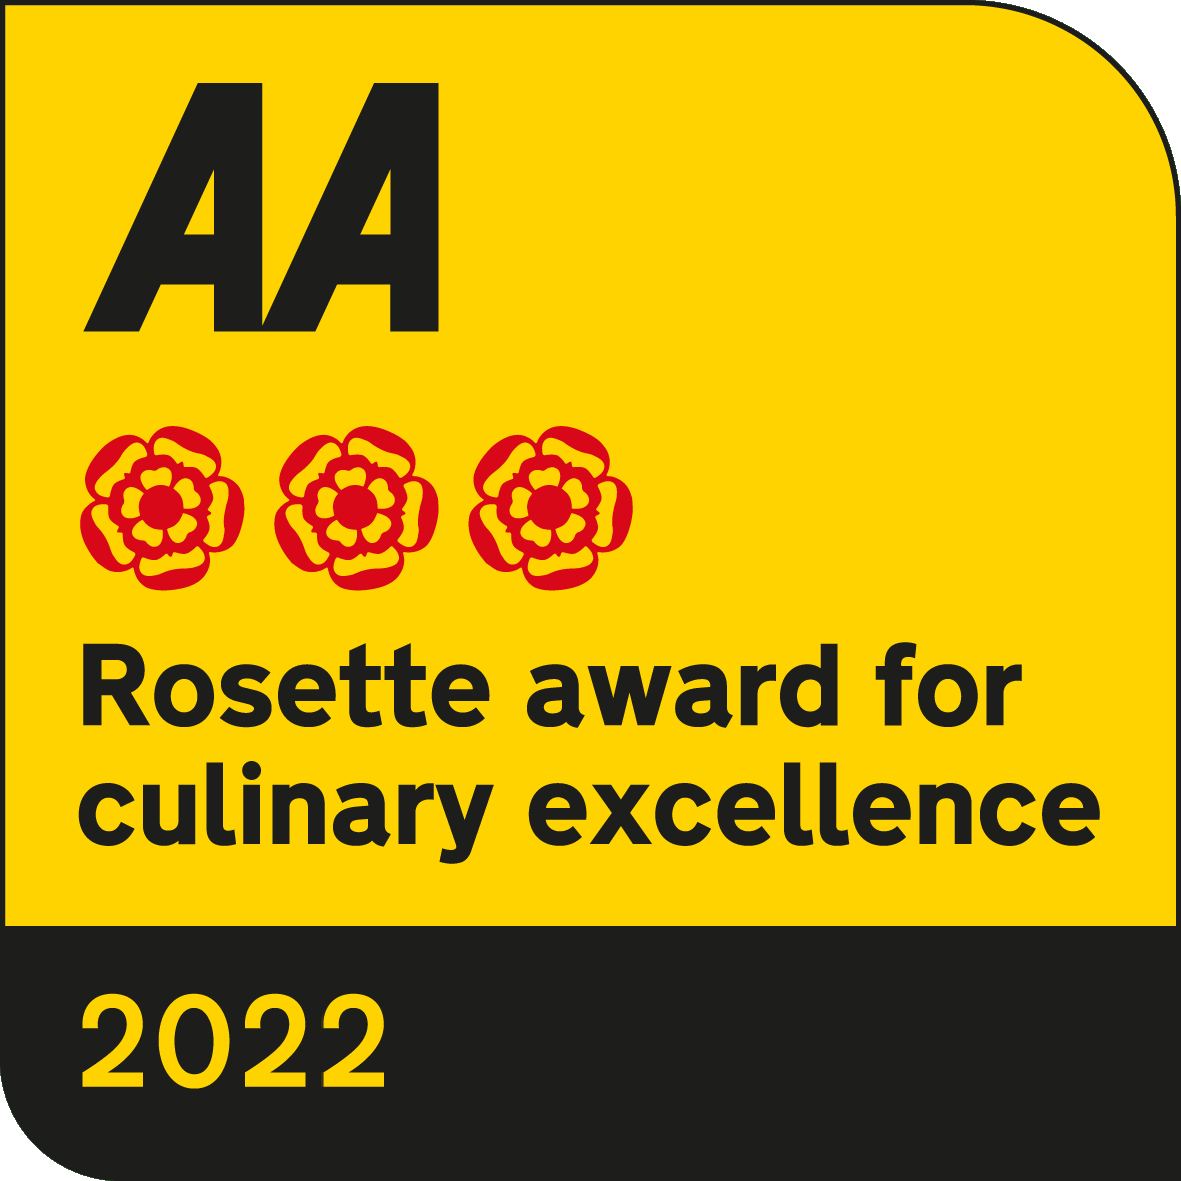 Rosette award for culinary excellence 2022